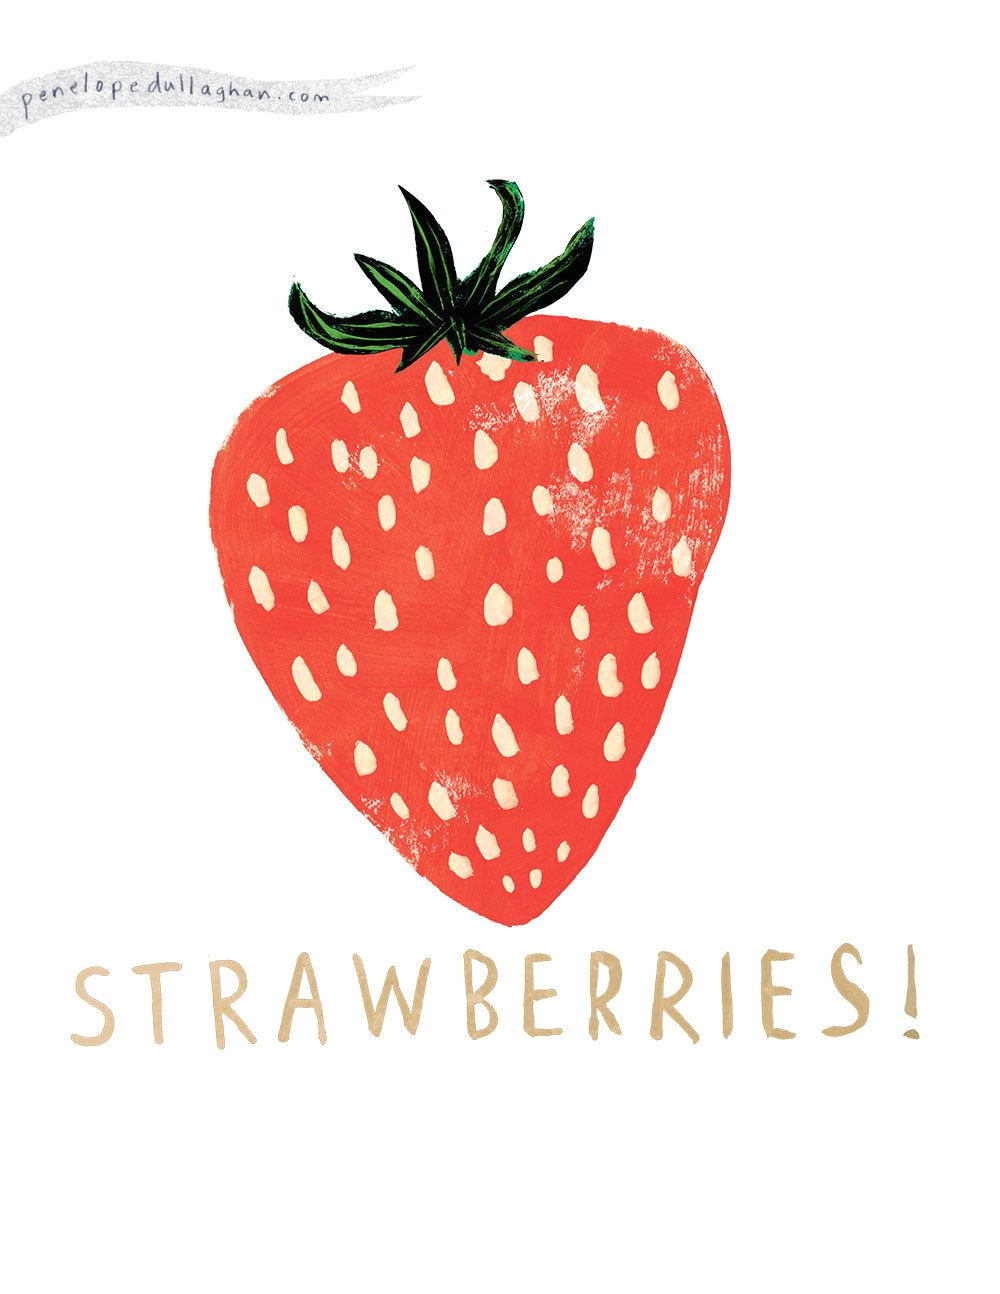 Easy Drawings with Texture Strawberries Design Illustration Simple Food Drawing Design